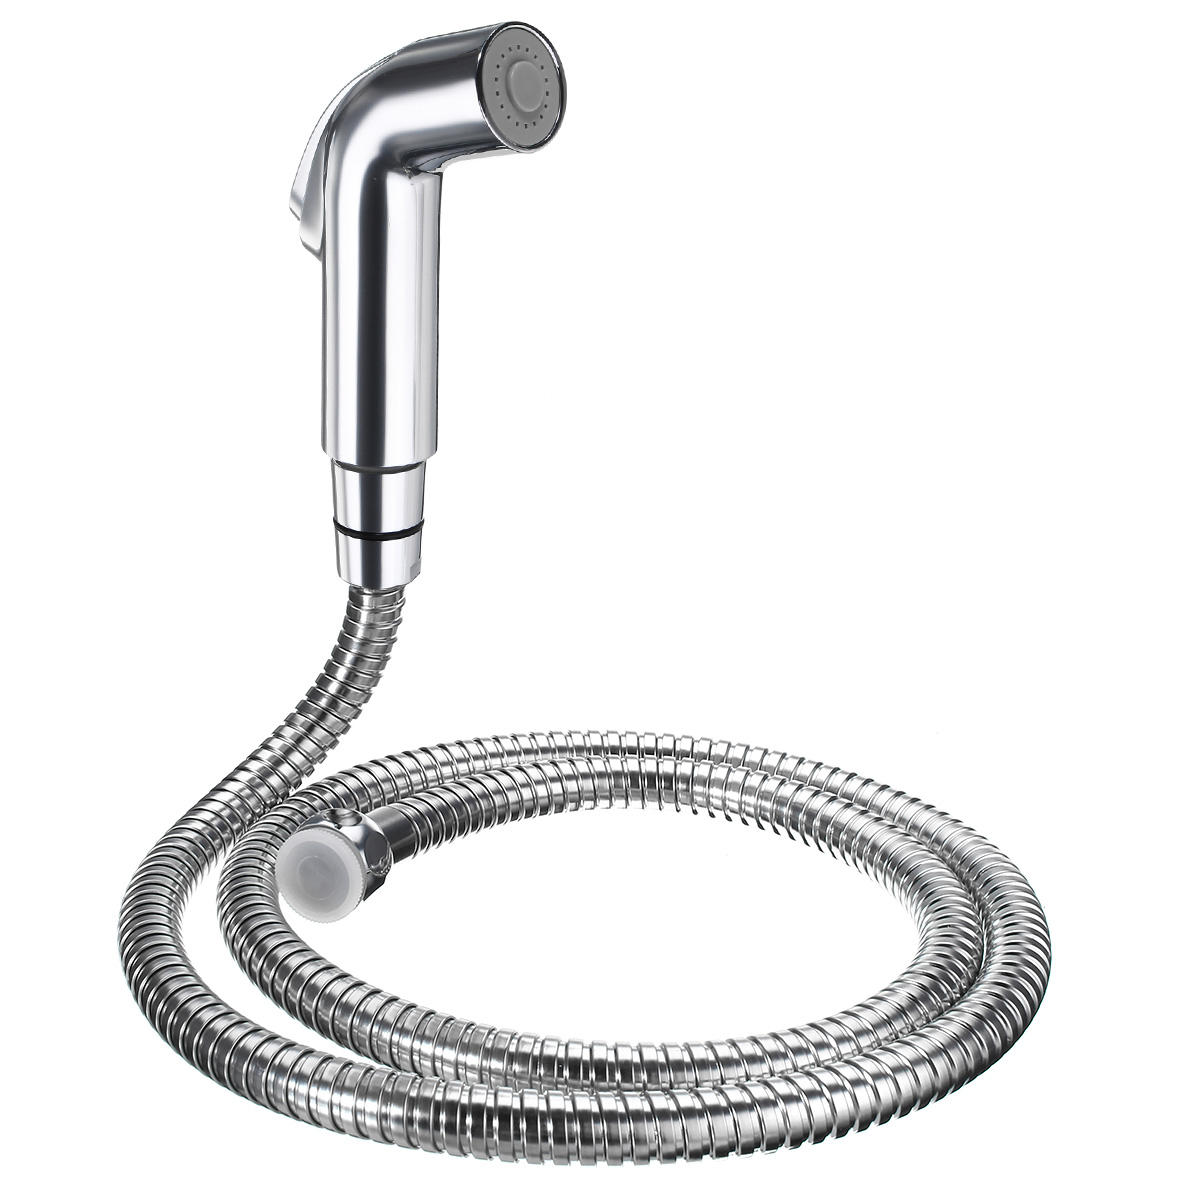 Toilet Cleaning Spray Nozzle With A Hose And Toilet Flushing Head